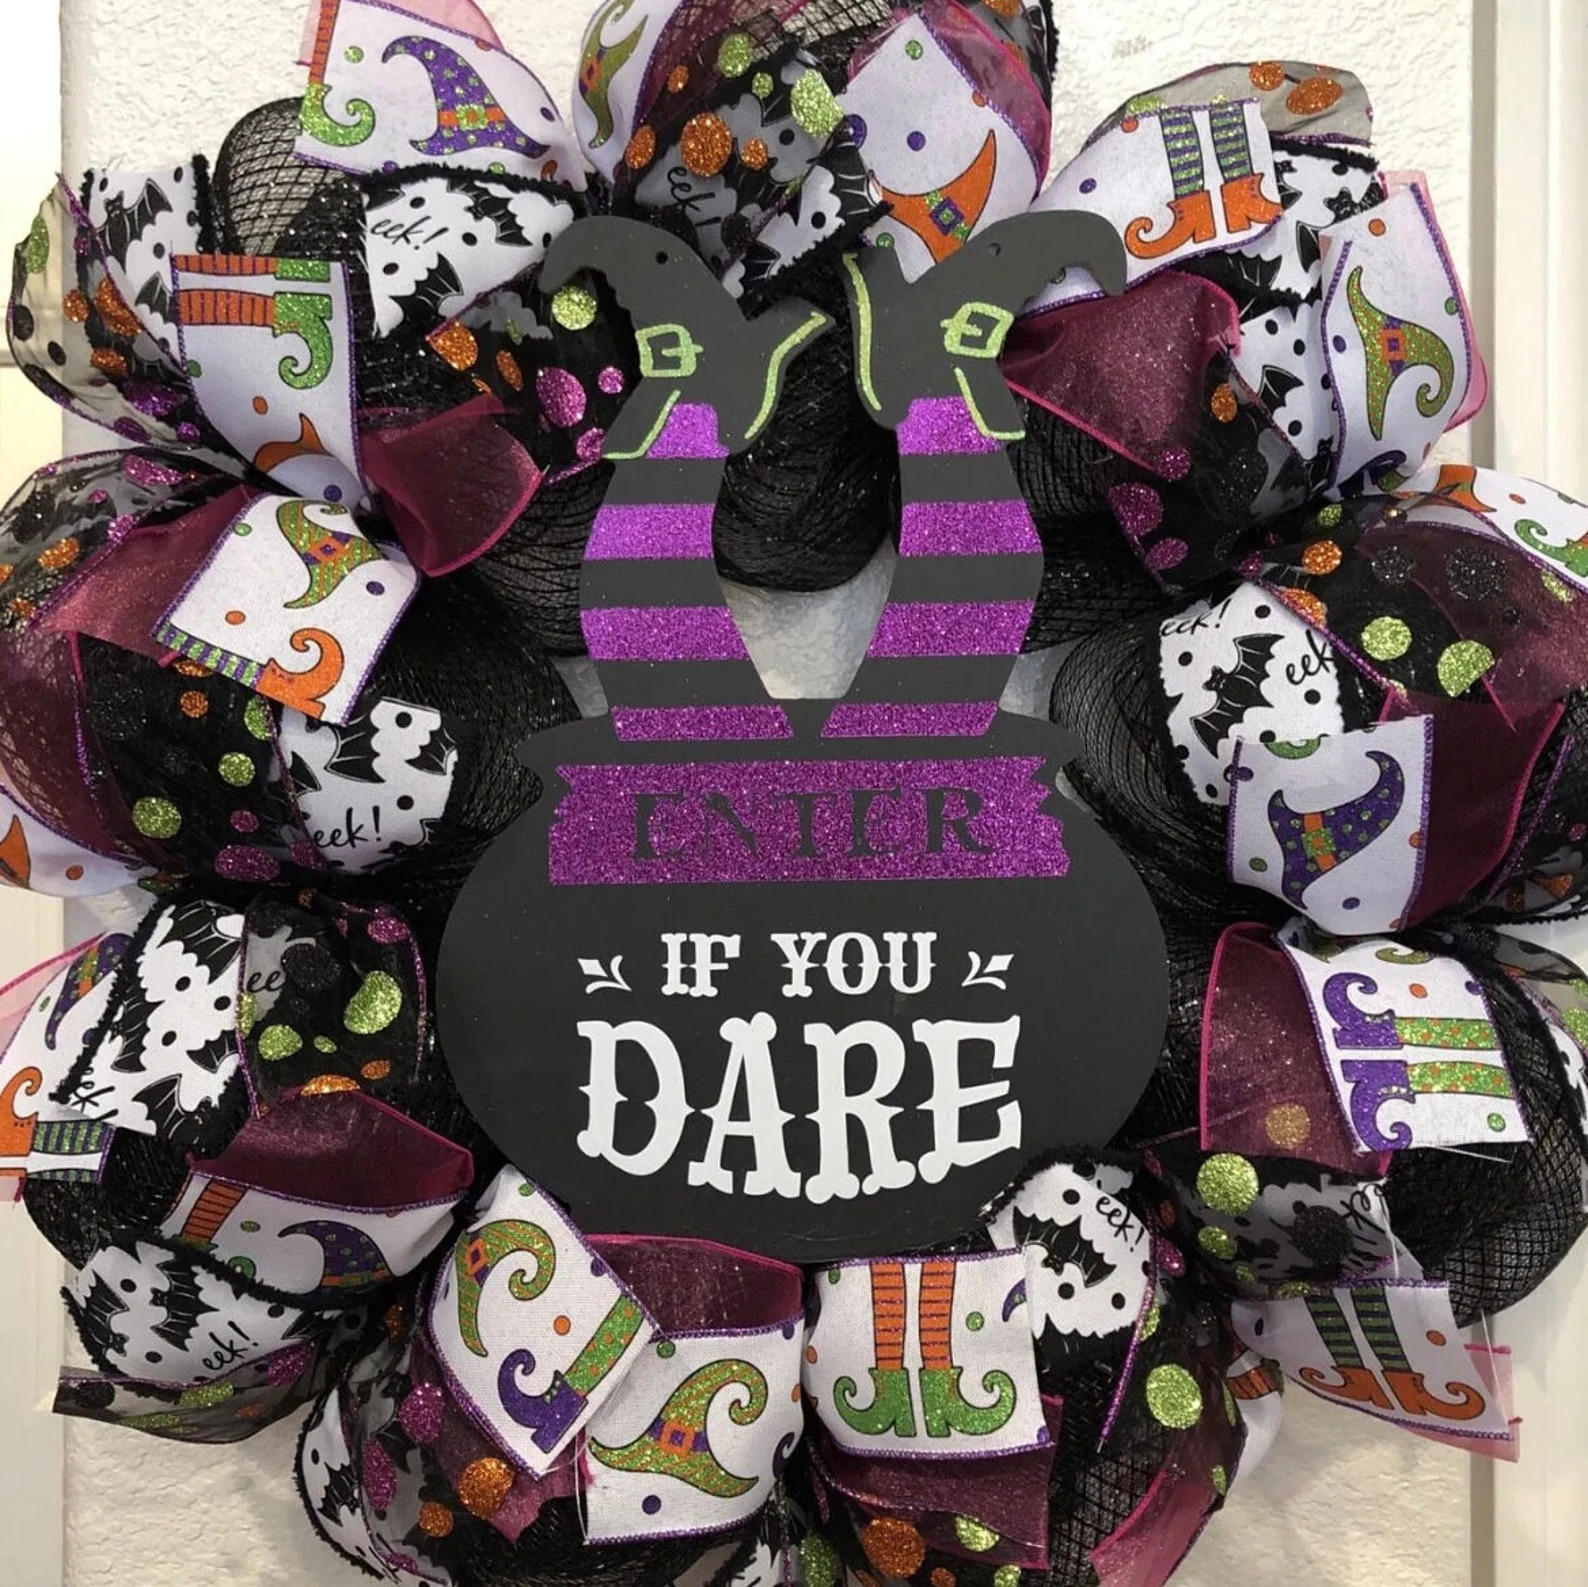 15 Sinister Witch Wreath Designs For Halloween